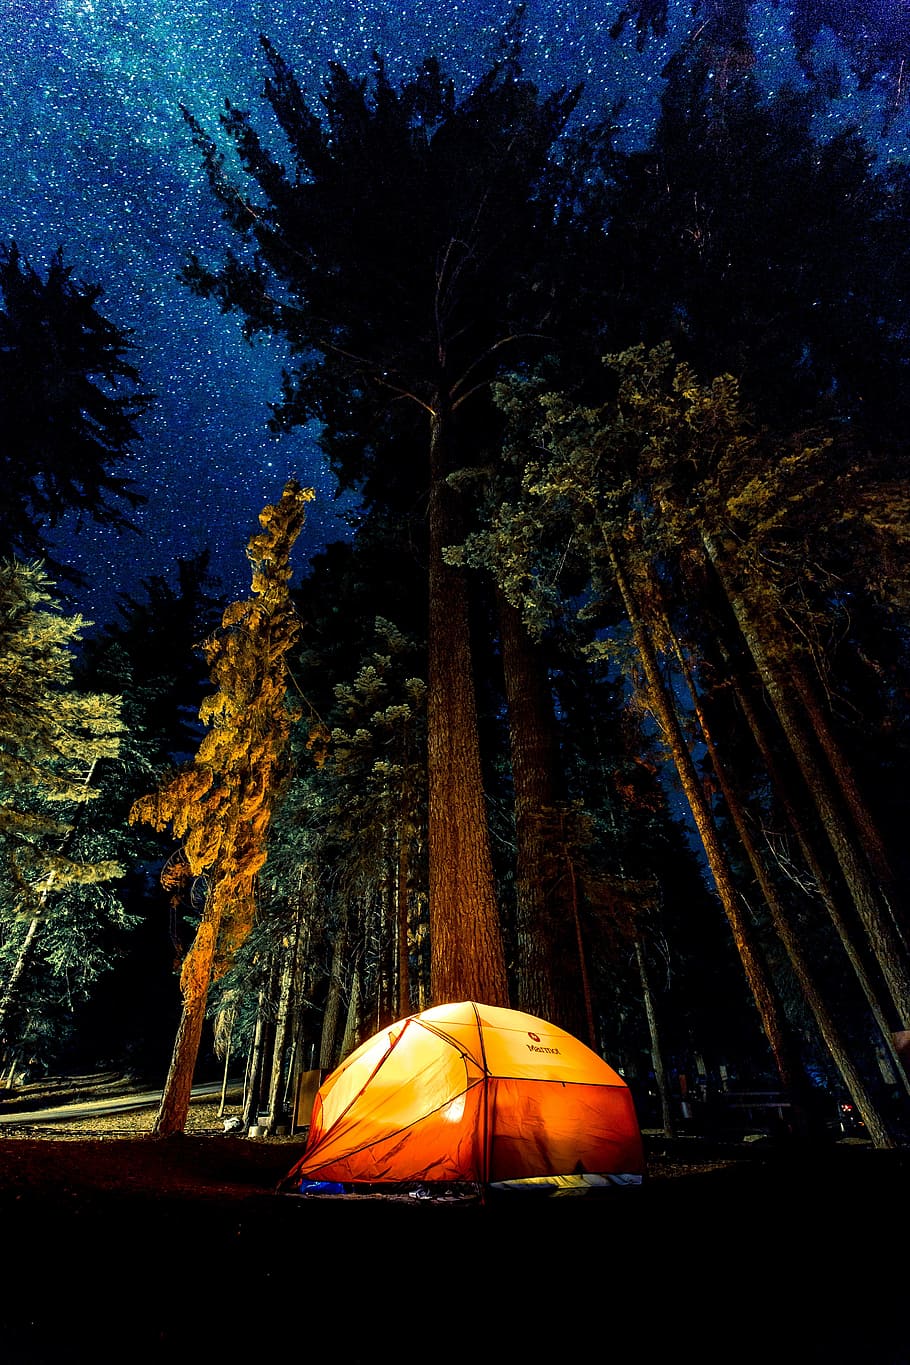 lighted, dome tent, trees, starry night, orange, tent, surrounded, nighttime, dark, night